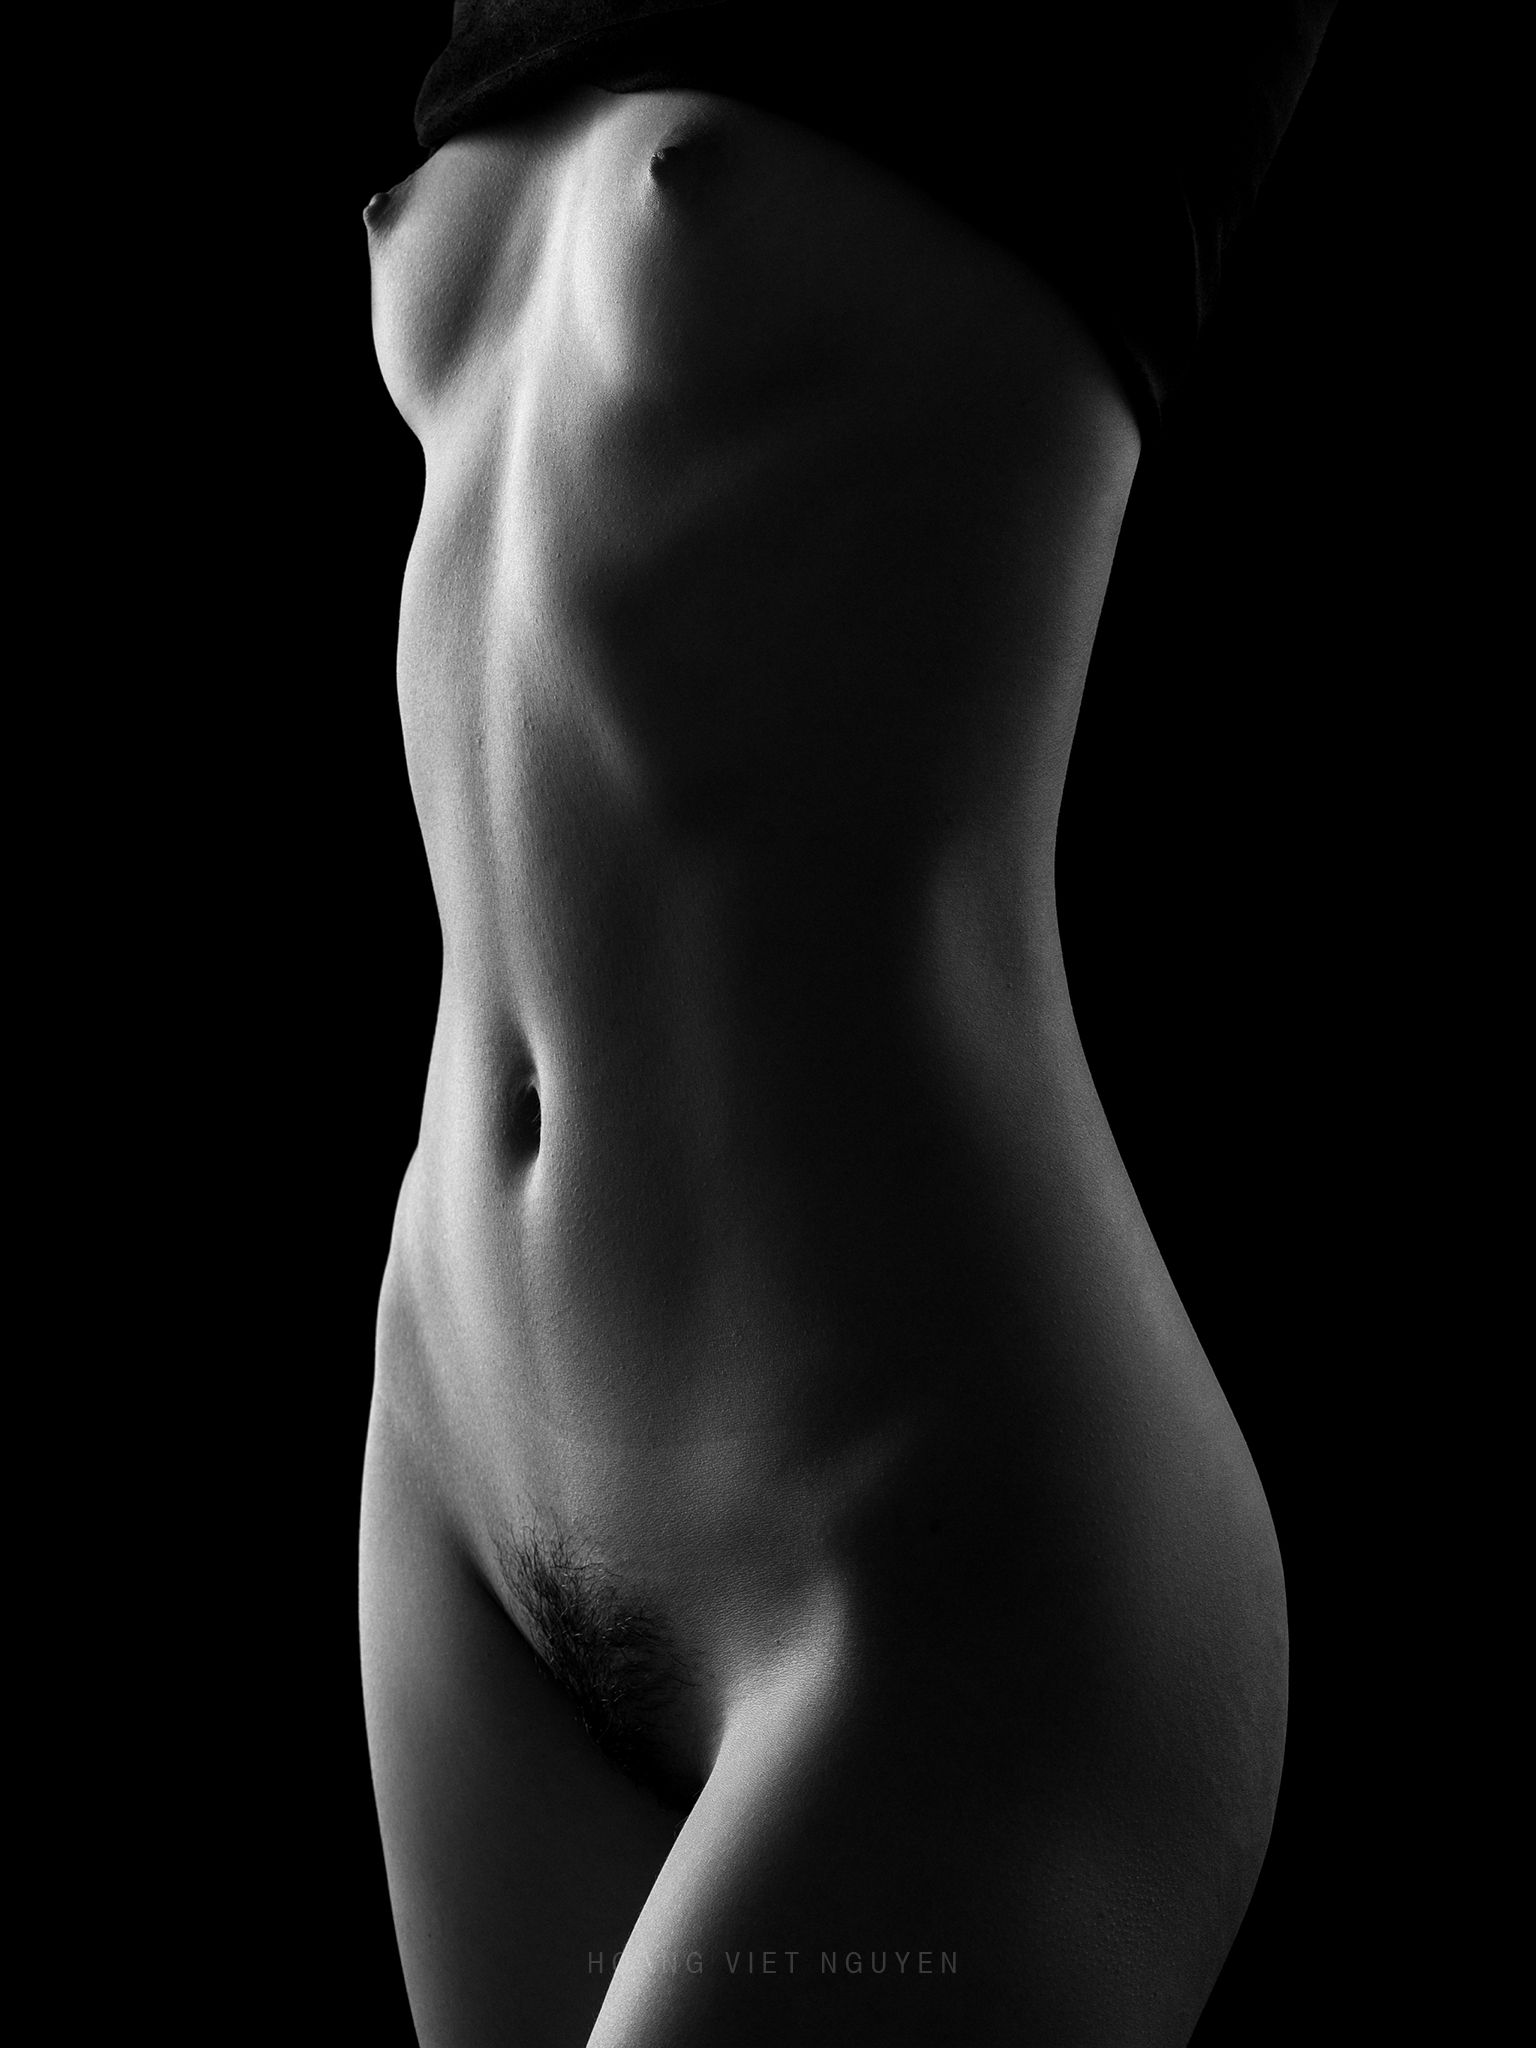 body, woman, female, vietnamese, asian, girl, studio, fine nude, nude, young, bw, black and white, monochrome, shape, Hoang Viet Nguyen